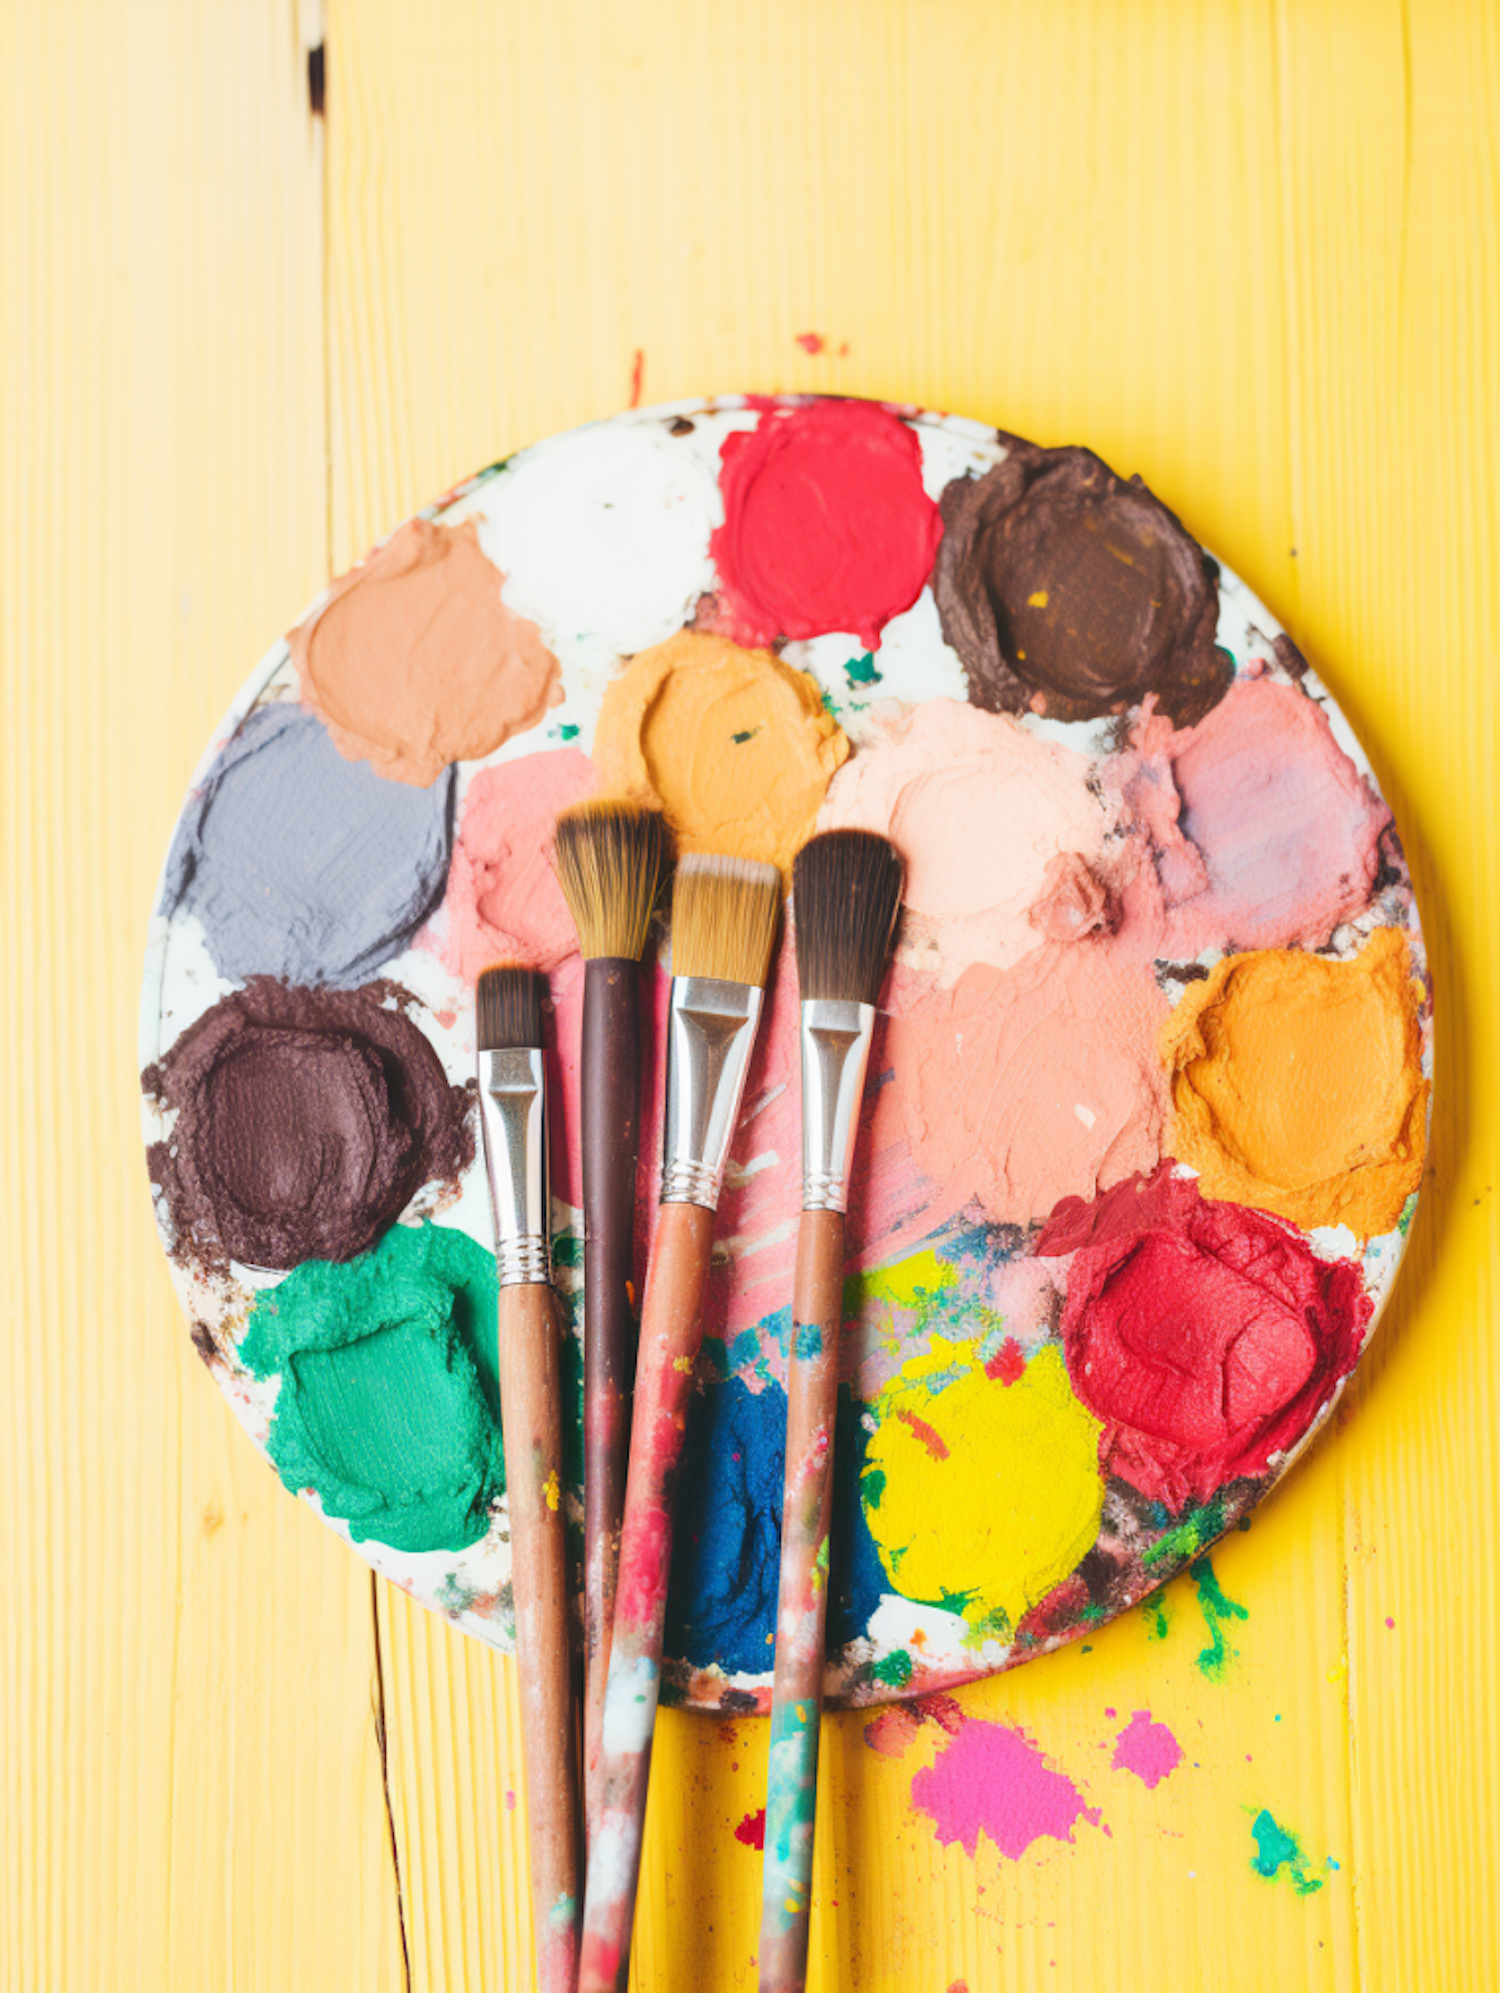 Artistic Palette with Paintbrushes on Yellow